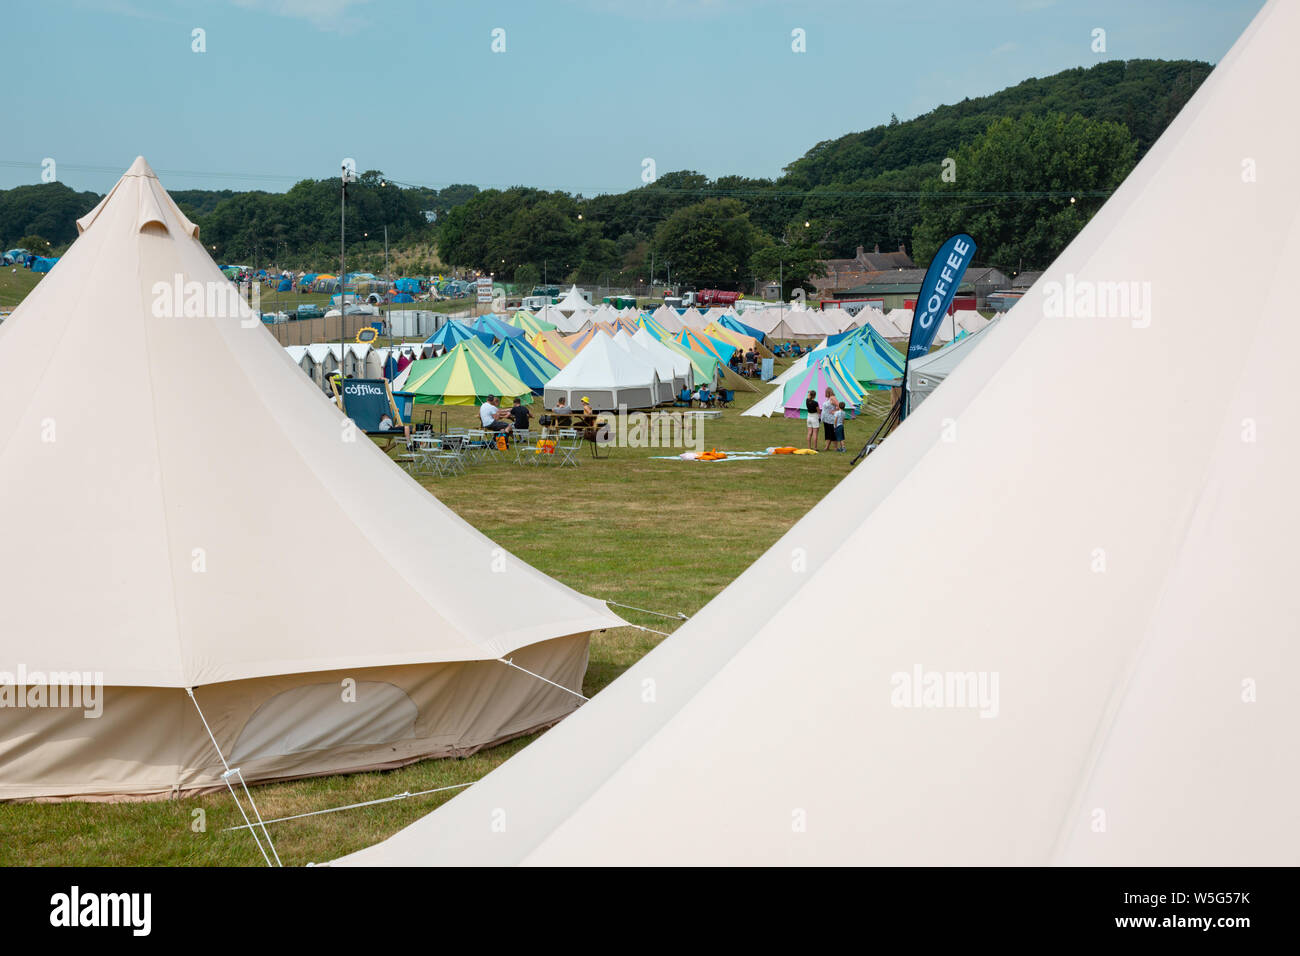 Large high end glamping tents, at an outdoor festival UK Stock Photo